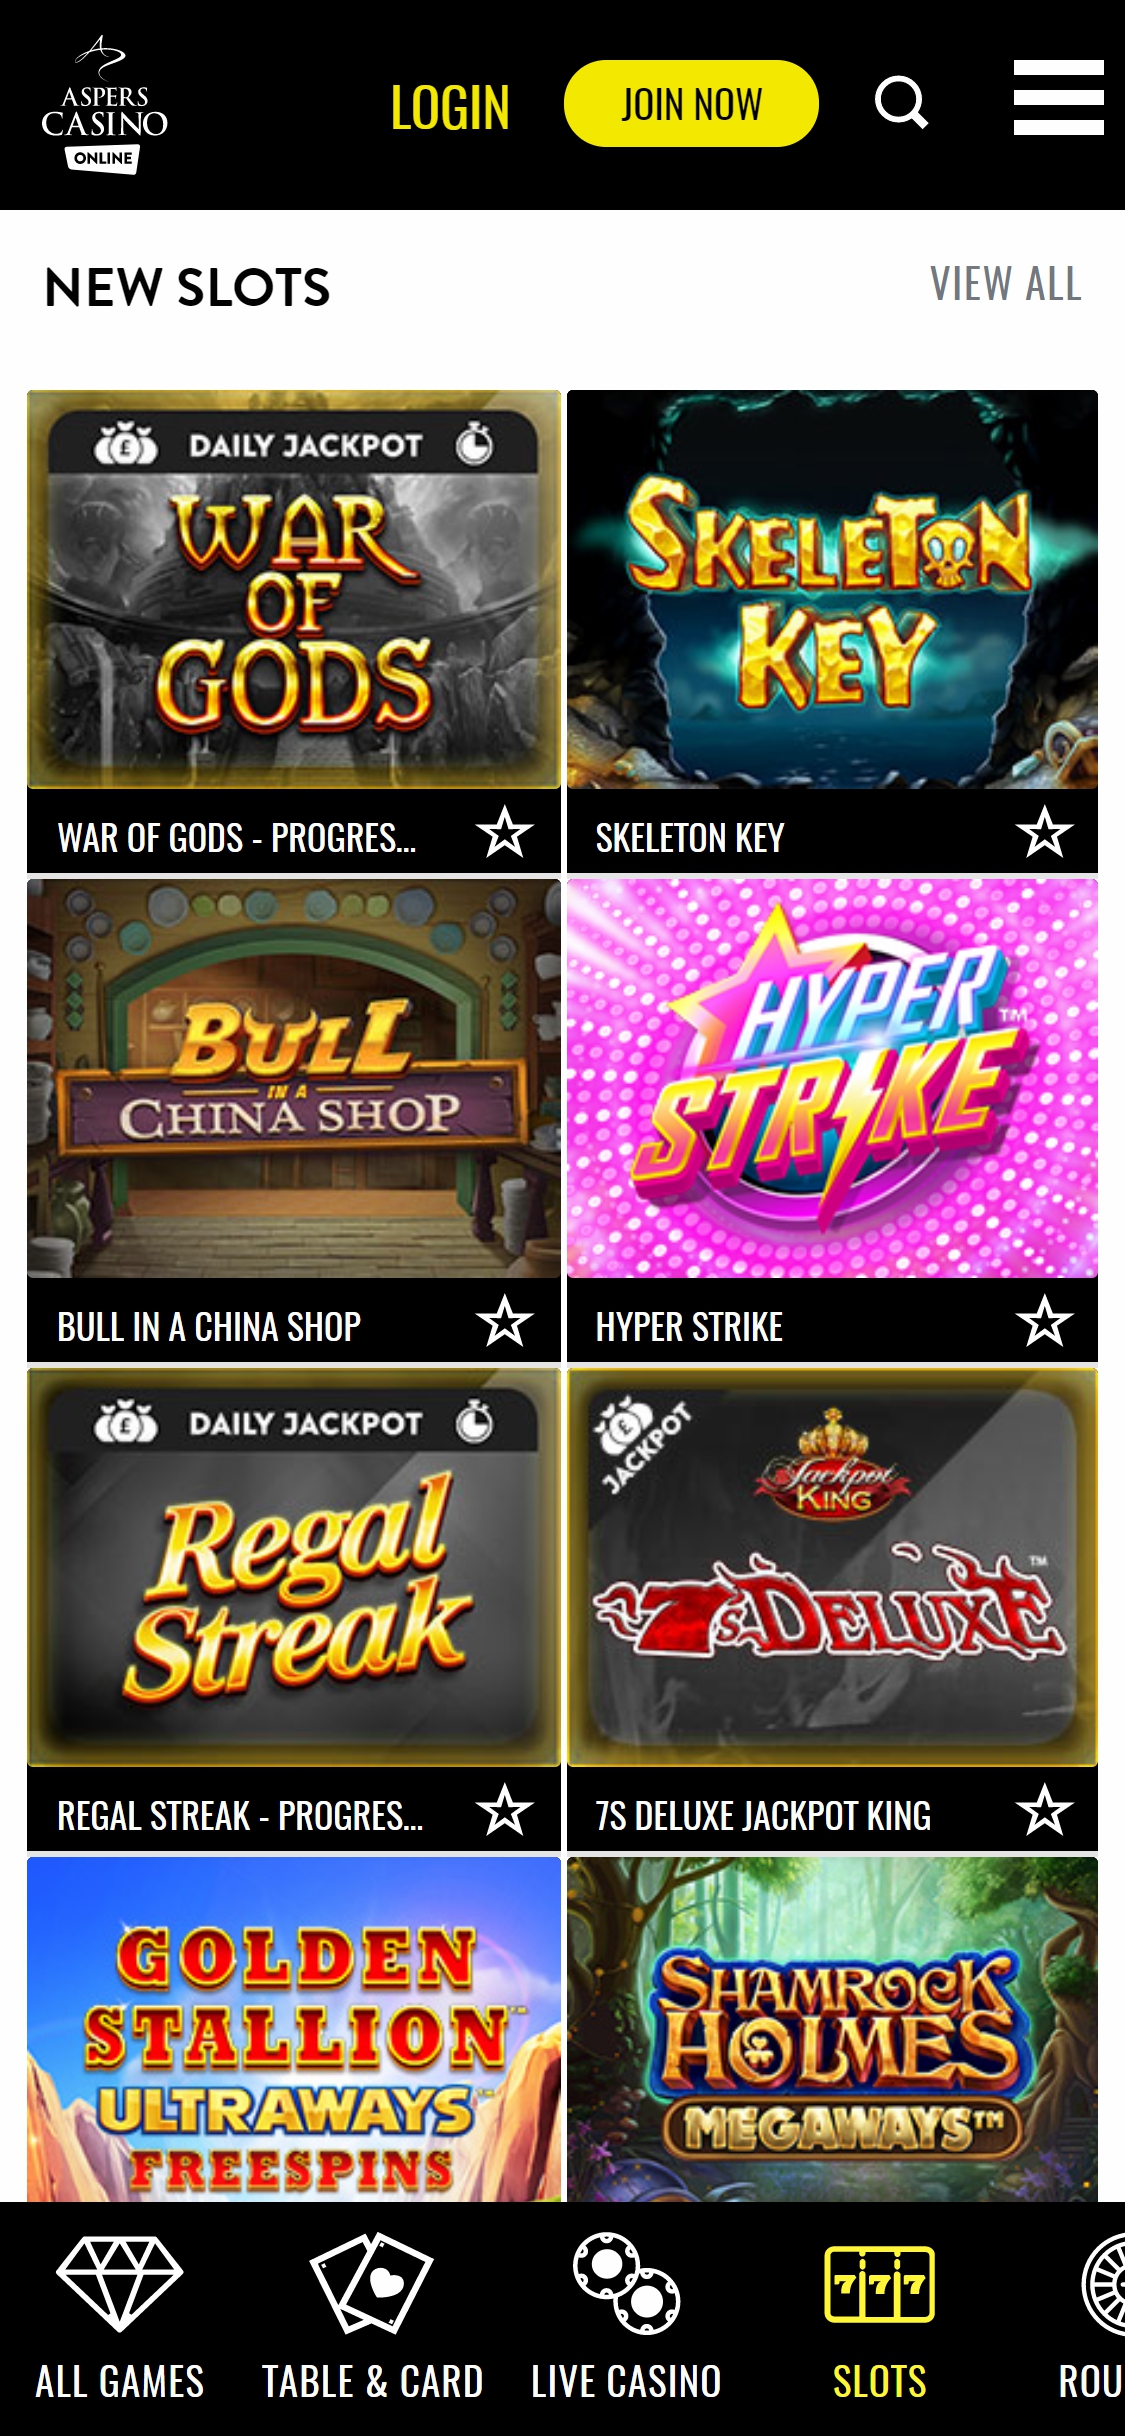 Aspers Casino Mobile Games Review